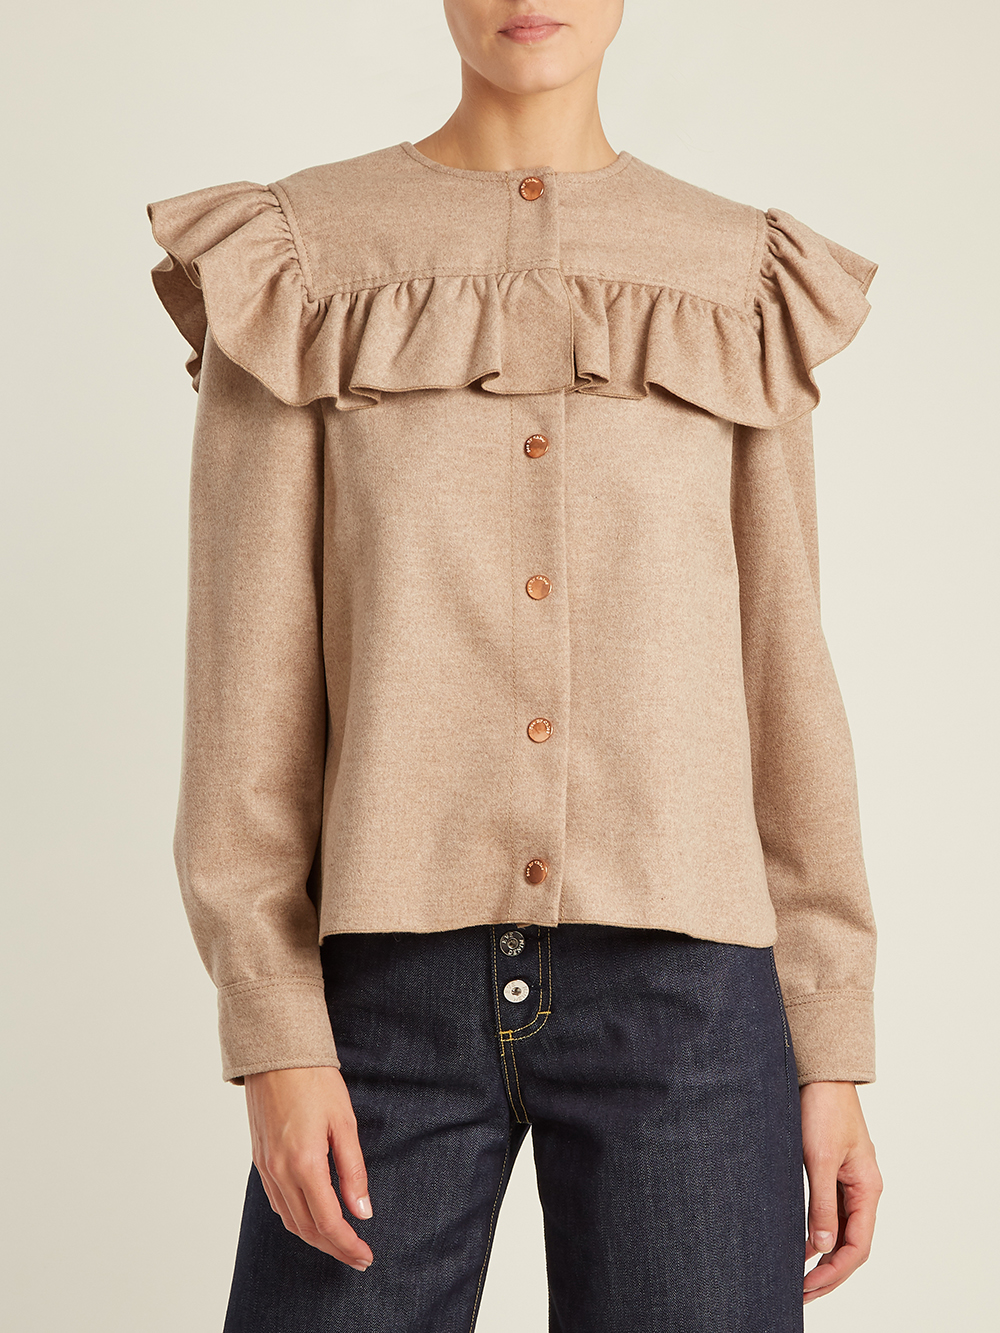 See by Chloe ruffle trip blouse, $280, from Matches Fashion